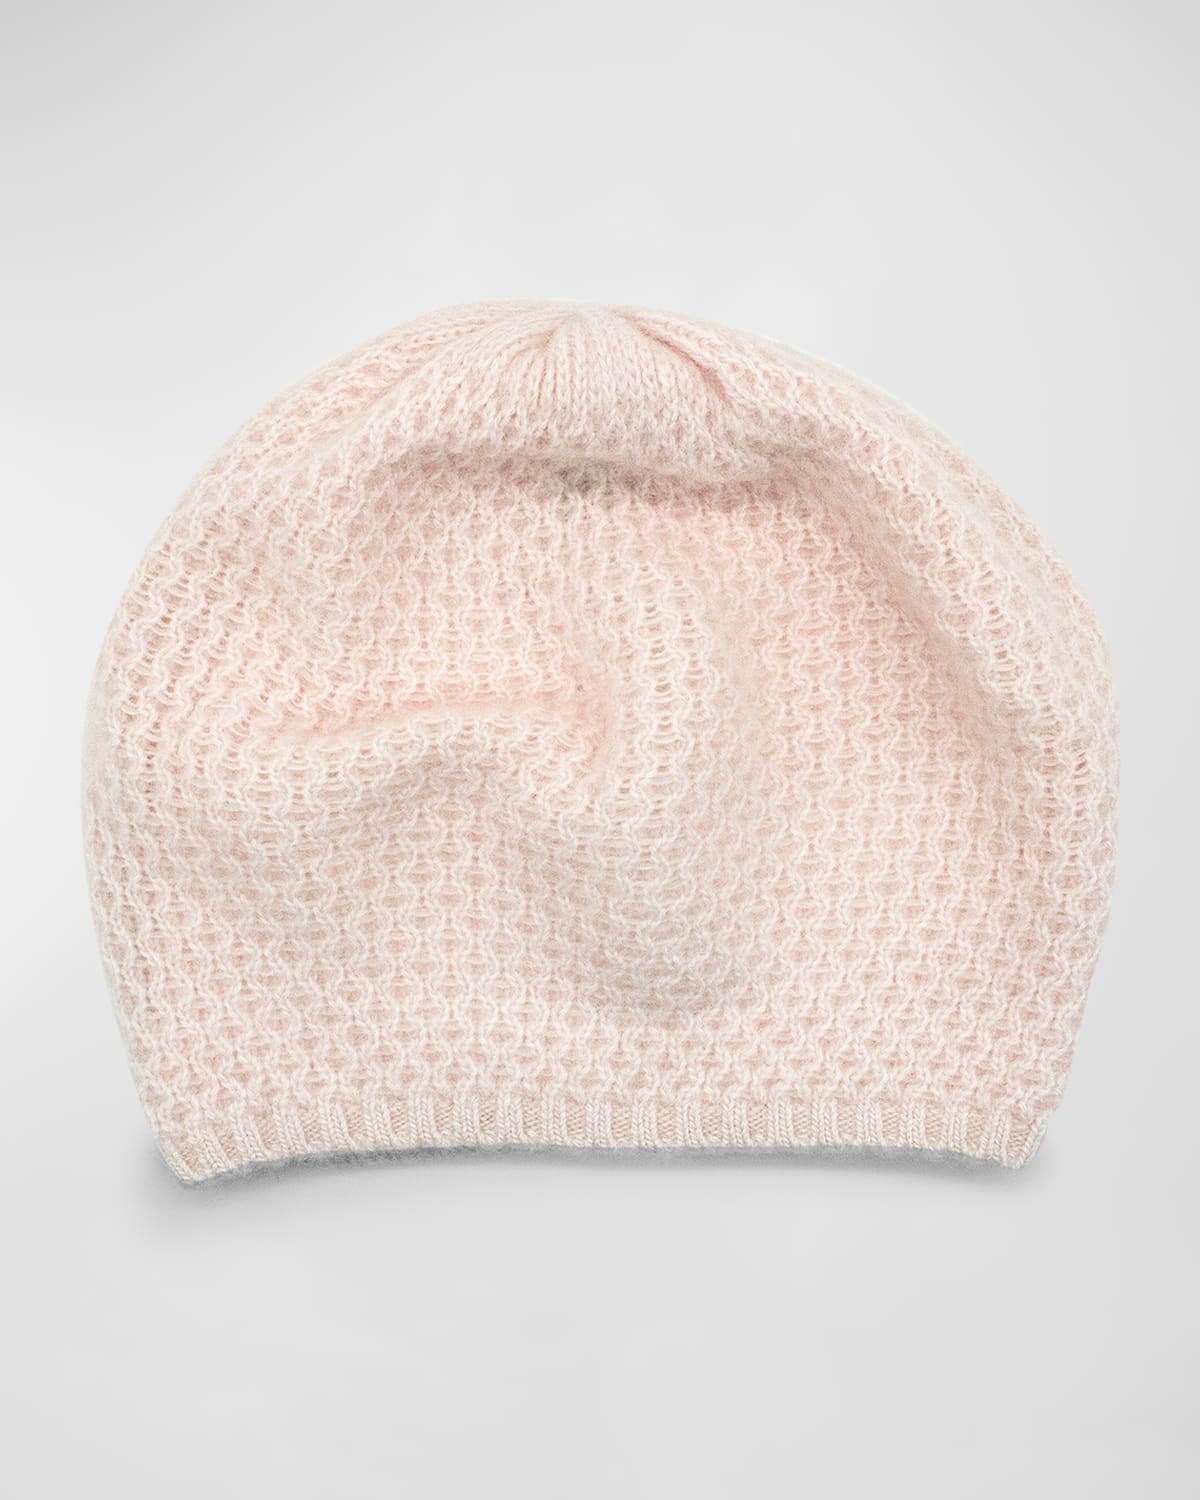 Honeycomb Cashmere Slouch Beanie